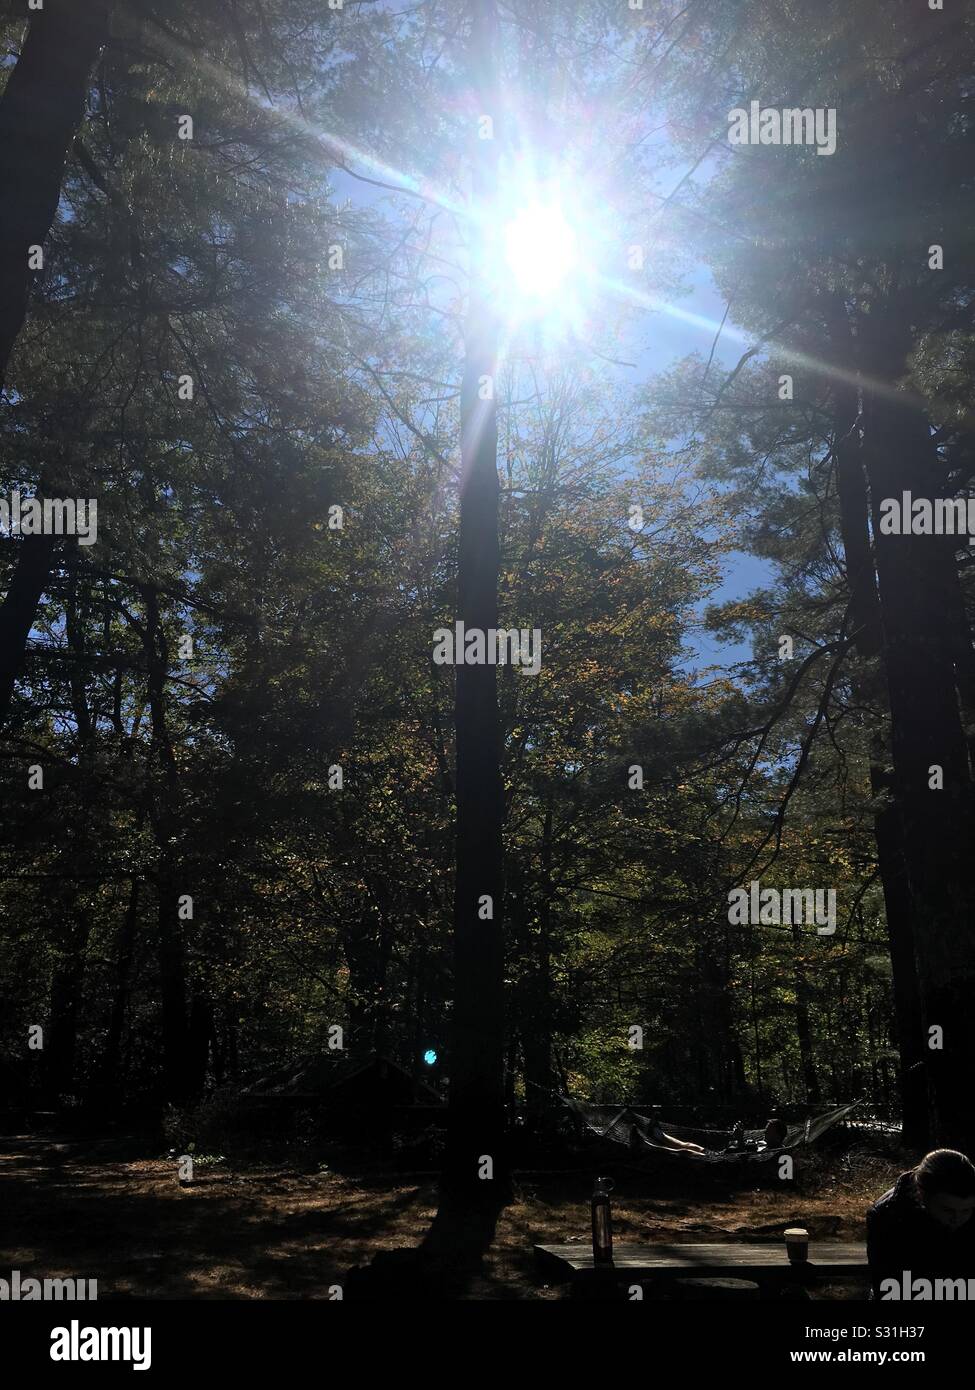 Sun beaming through a forest Stock Photo